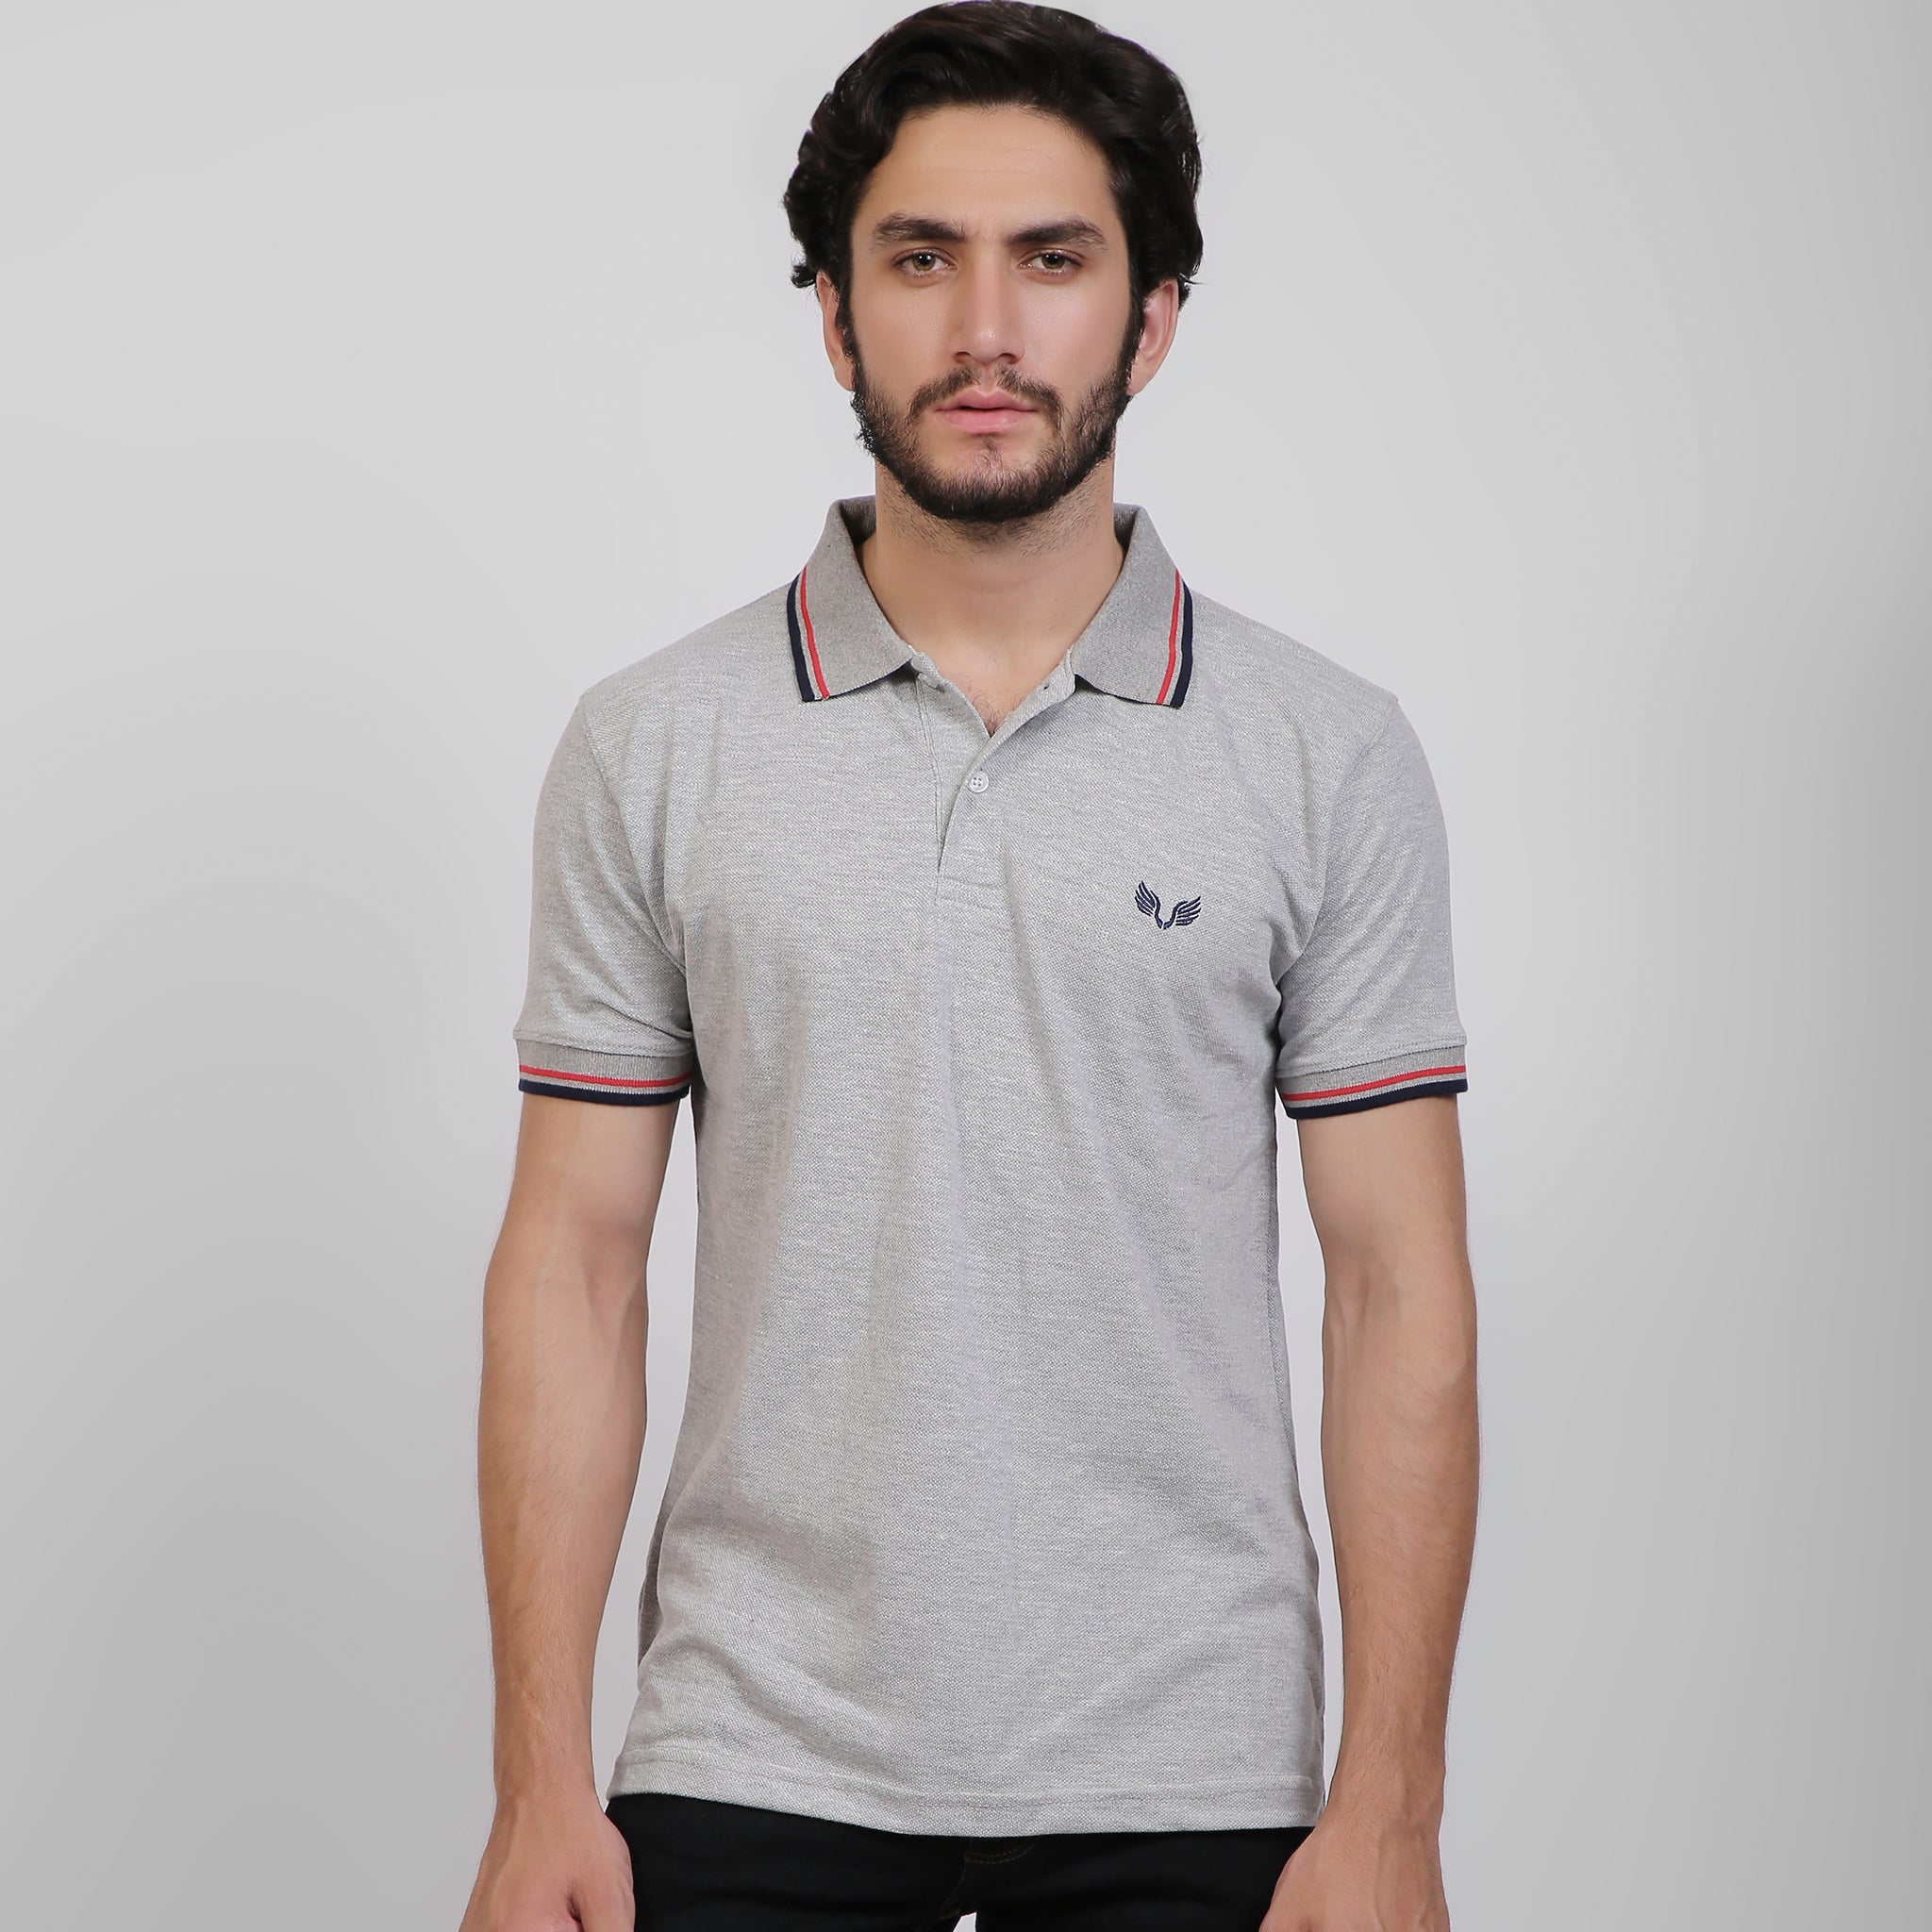 Casual Polo t Shirts for Men in Pakistan - Grey - PL-1111